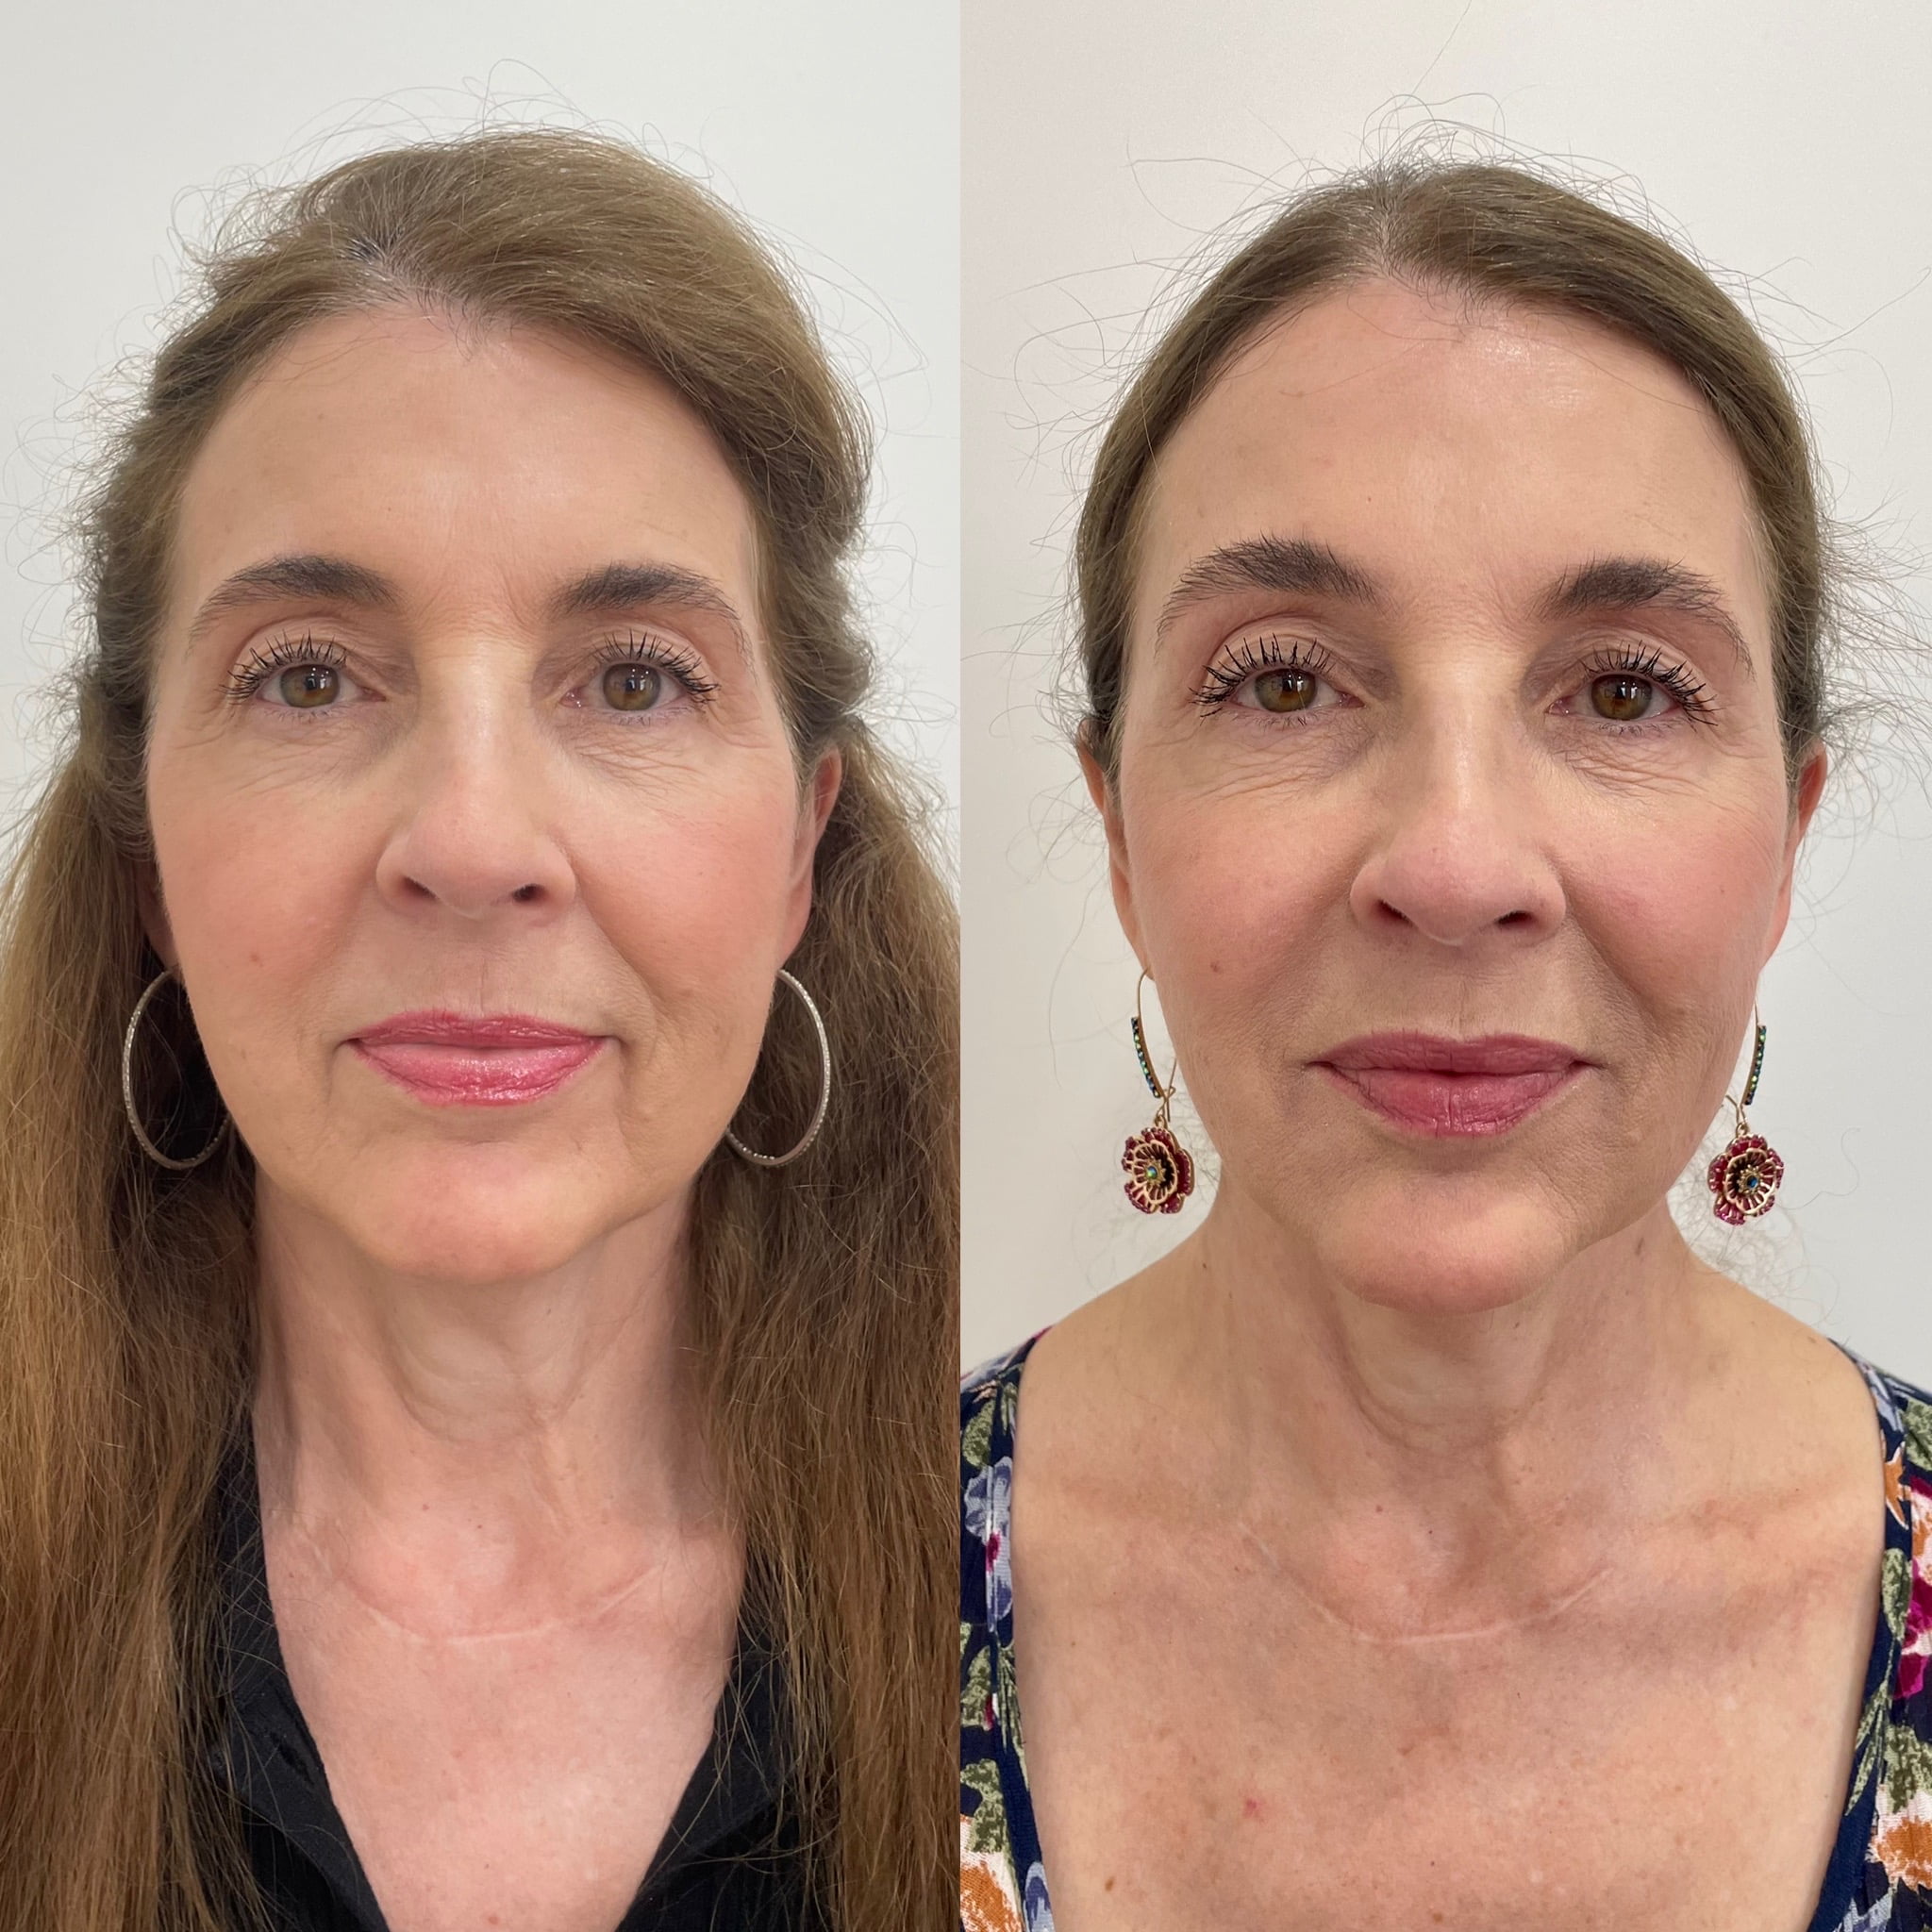 Before and After Fillers Marionettes treatment | Beauty Boost Med Spa at Newport Beach, CA